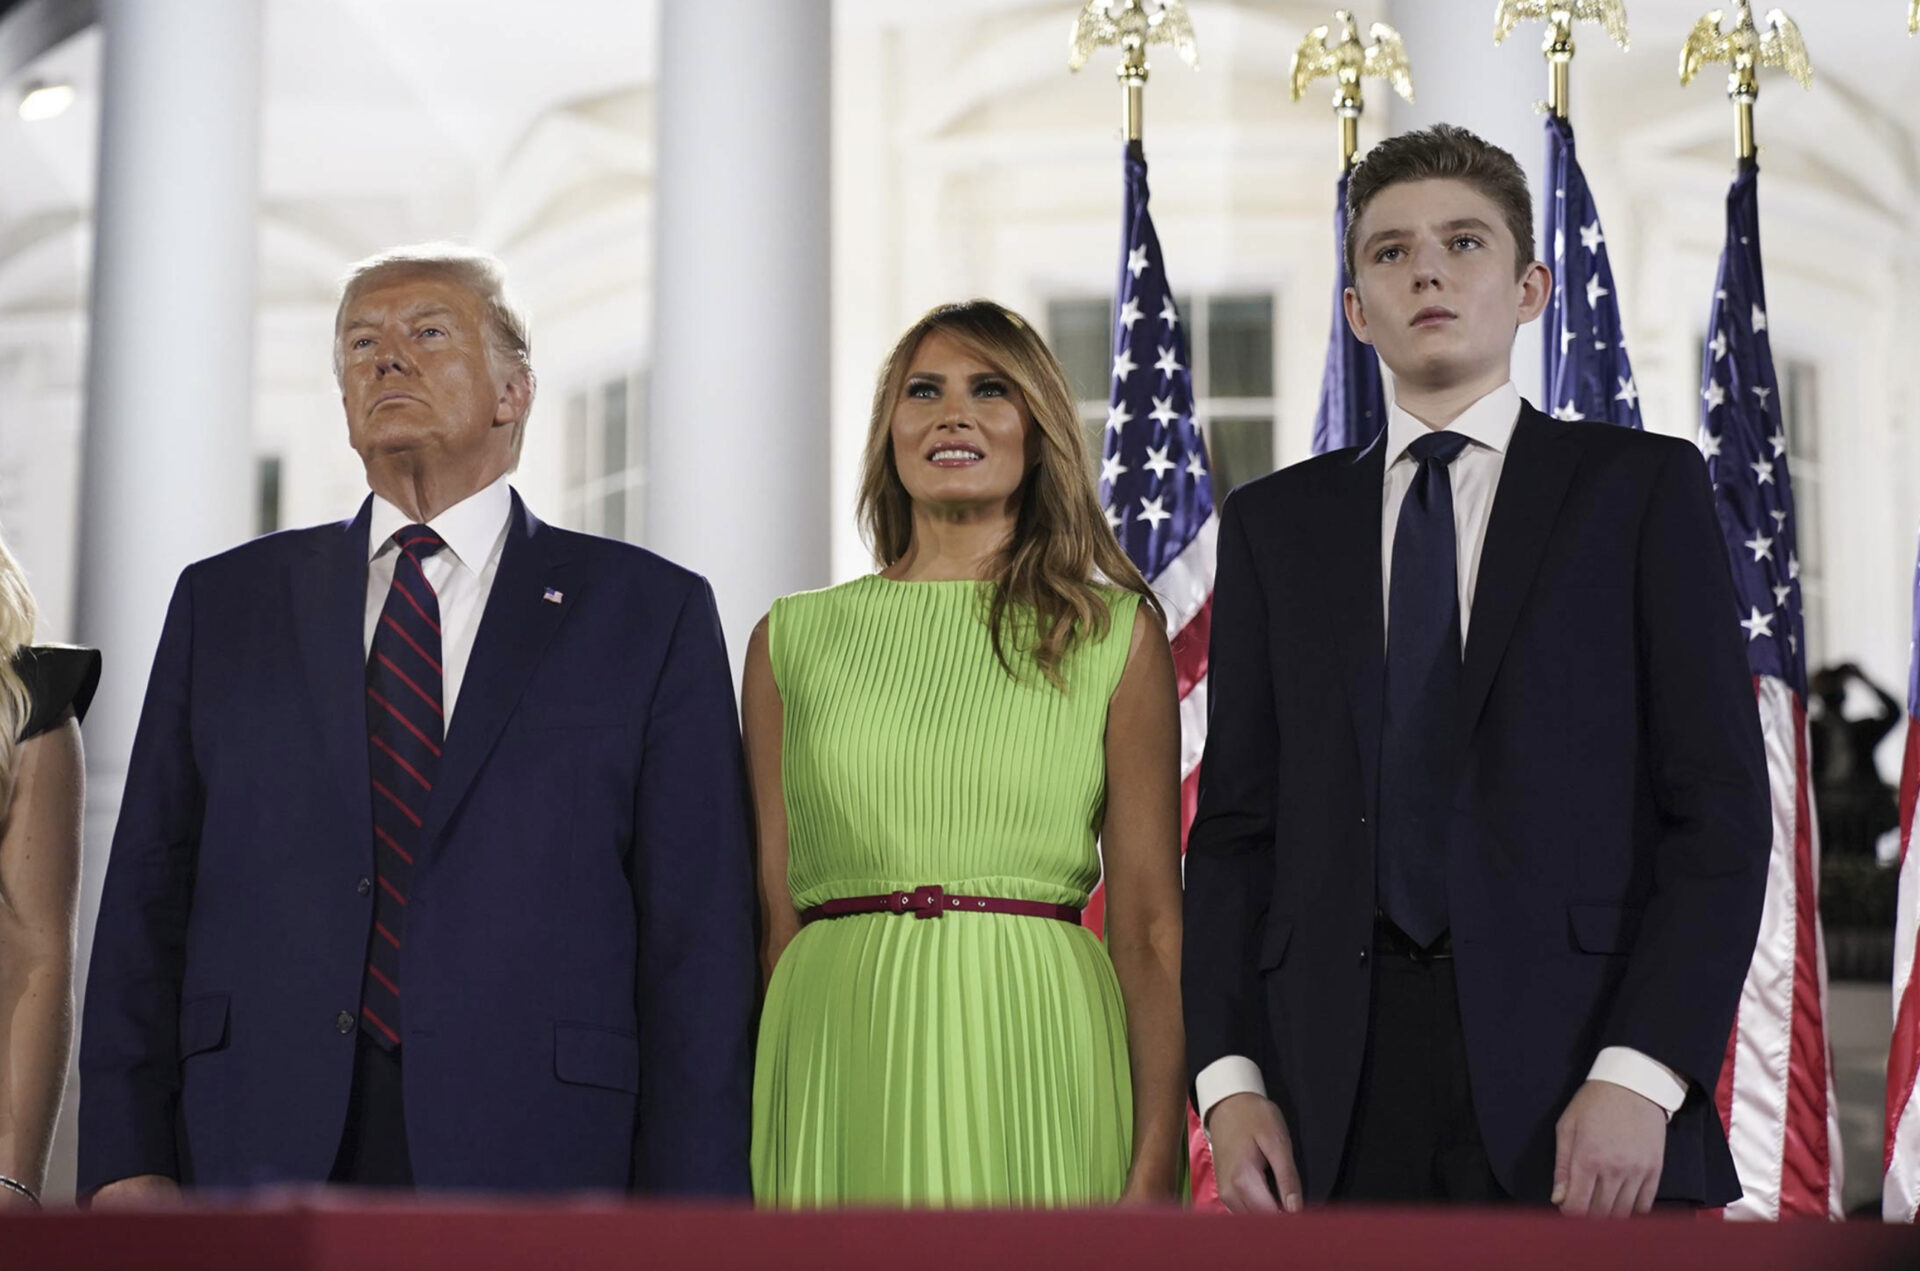 Trump Reportedly Doesn't 'Get Along' or With Son Barron